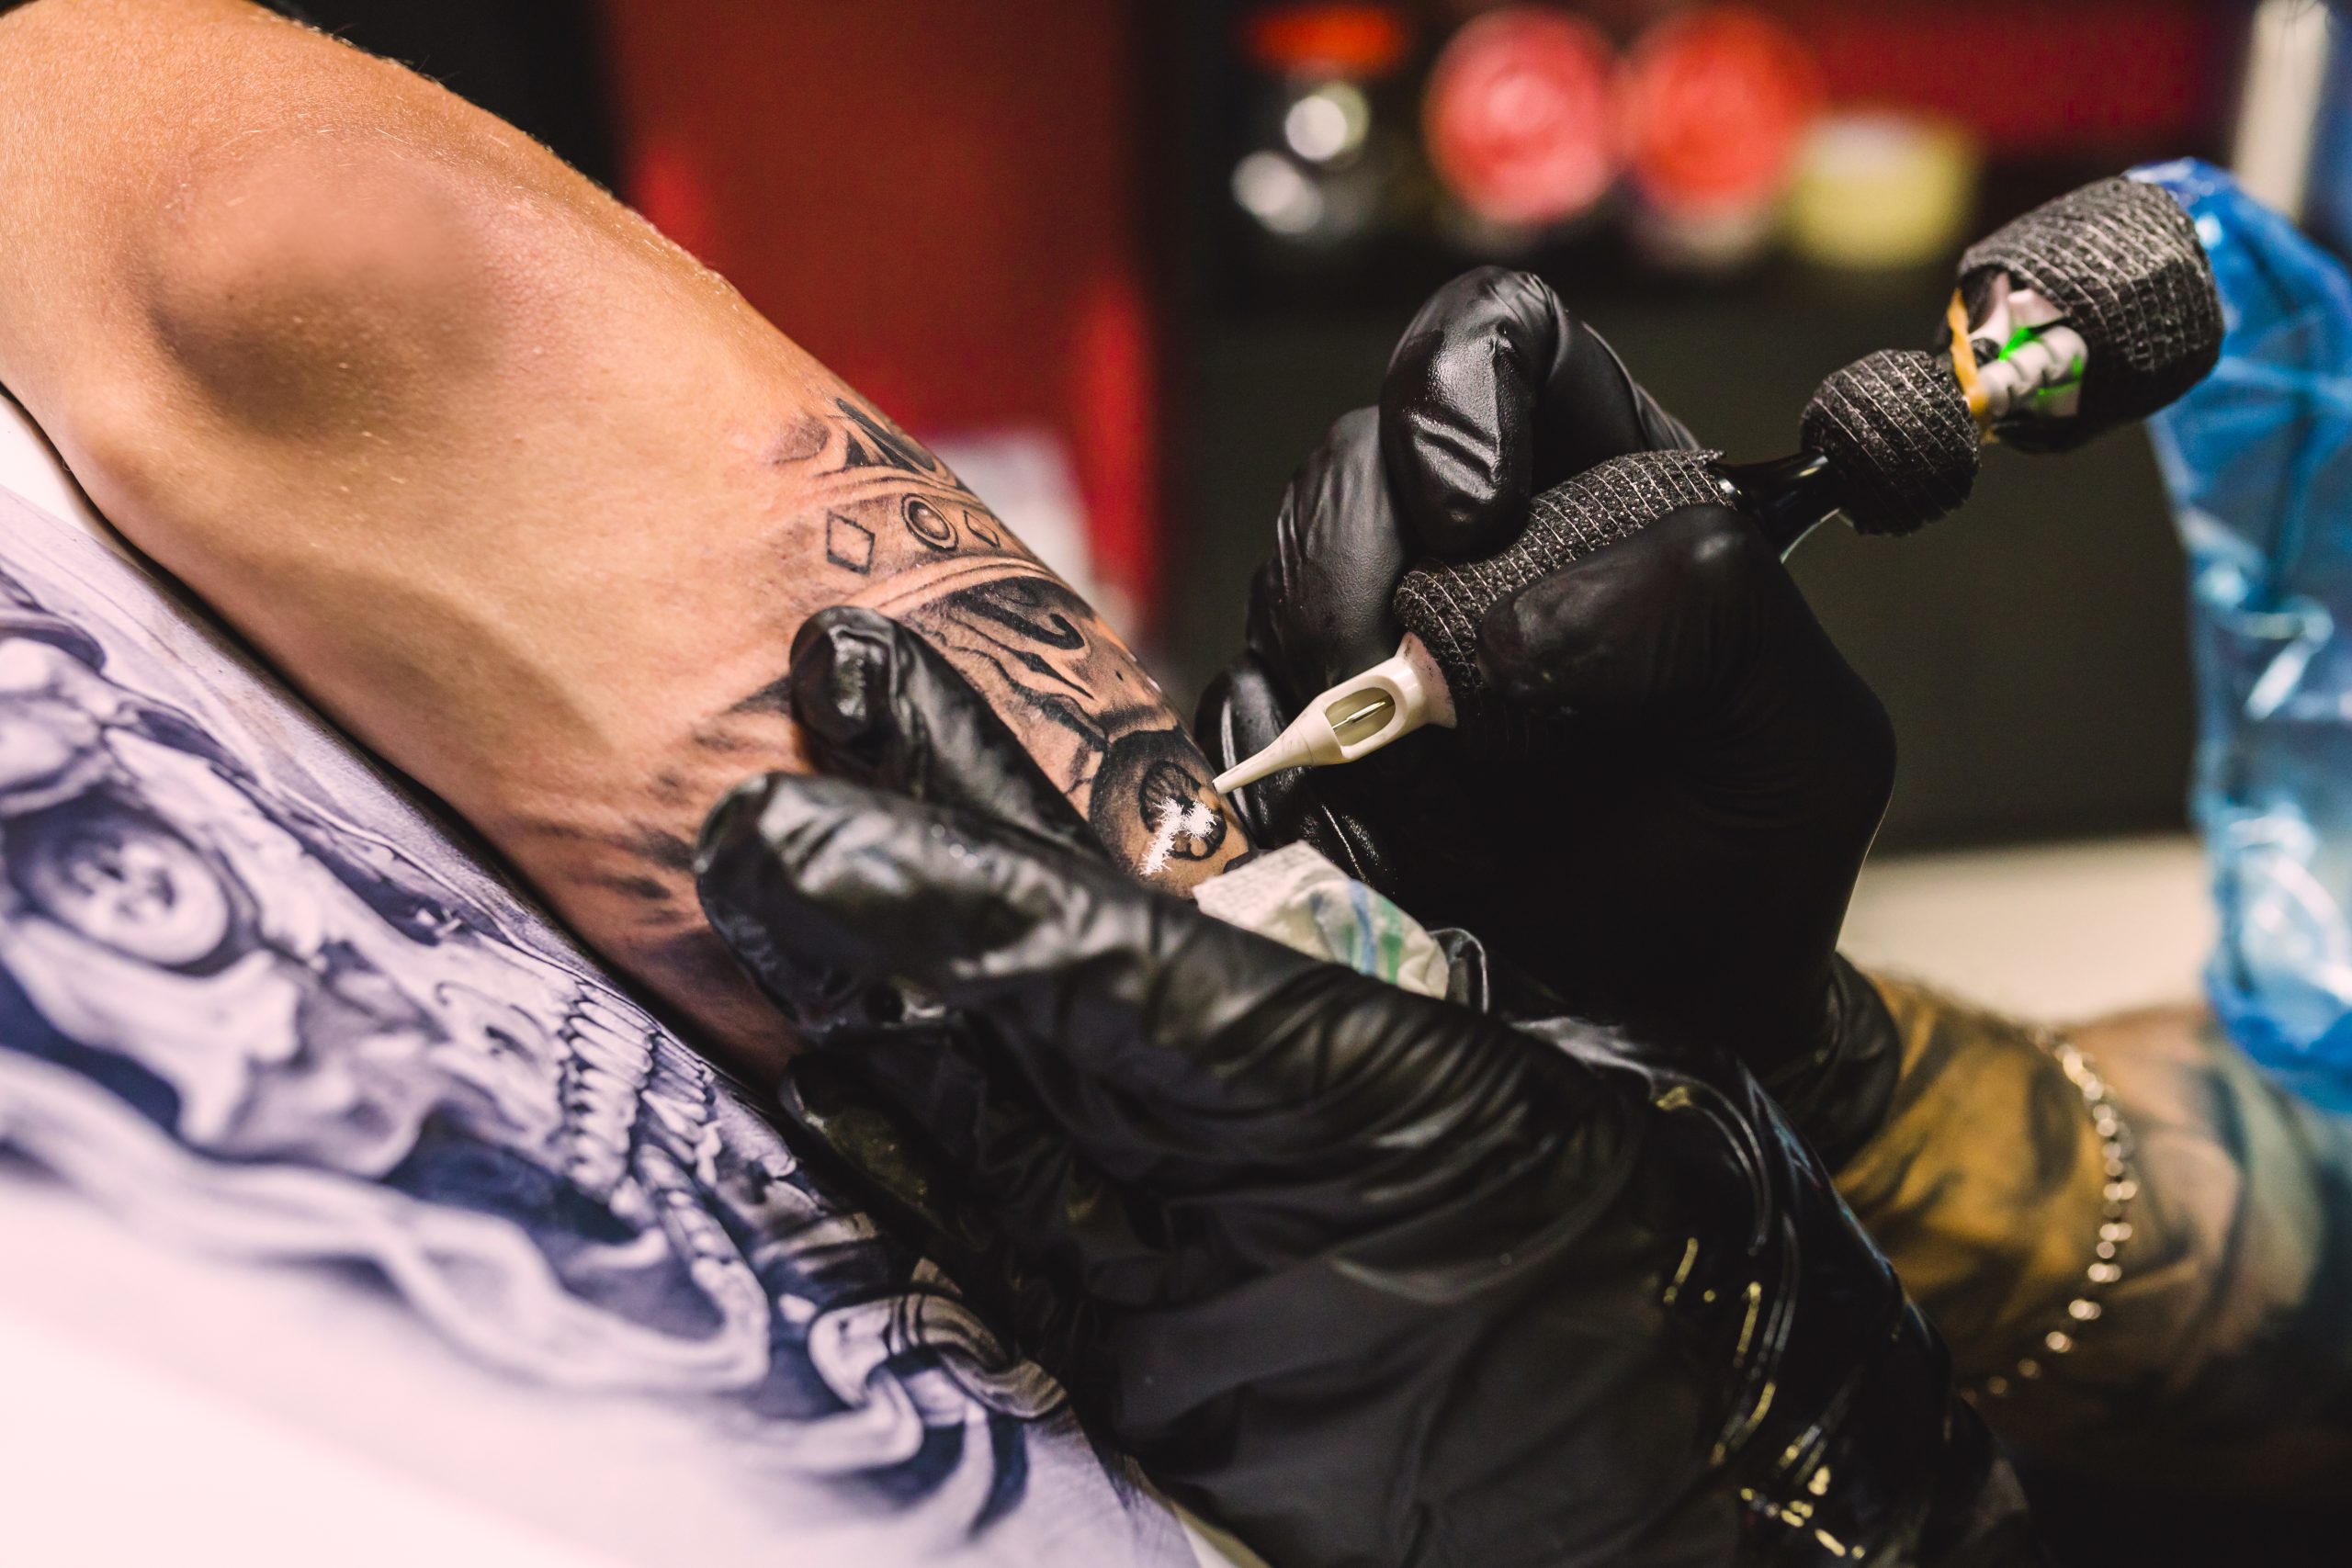 Tattoos in Vietnam Culture: Is it Acceptable? - Expat News